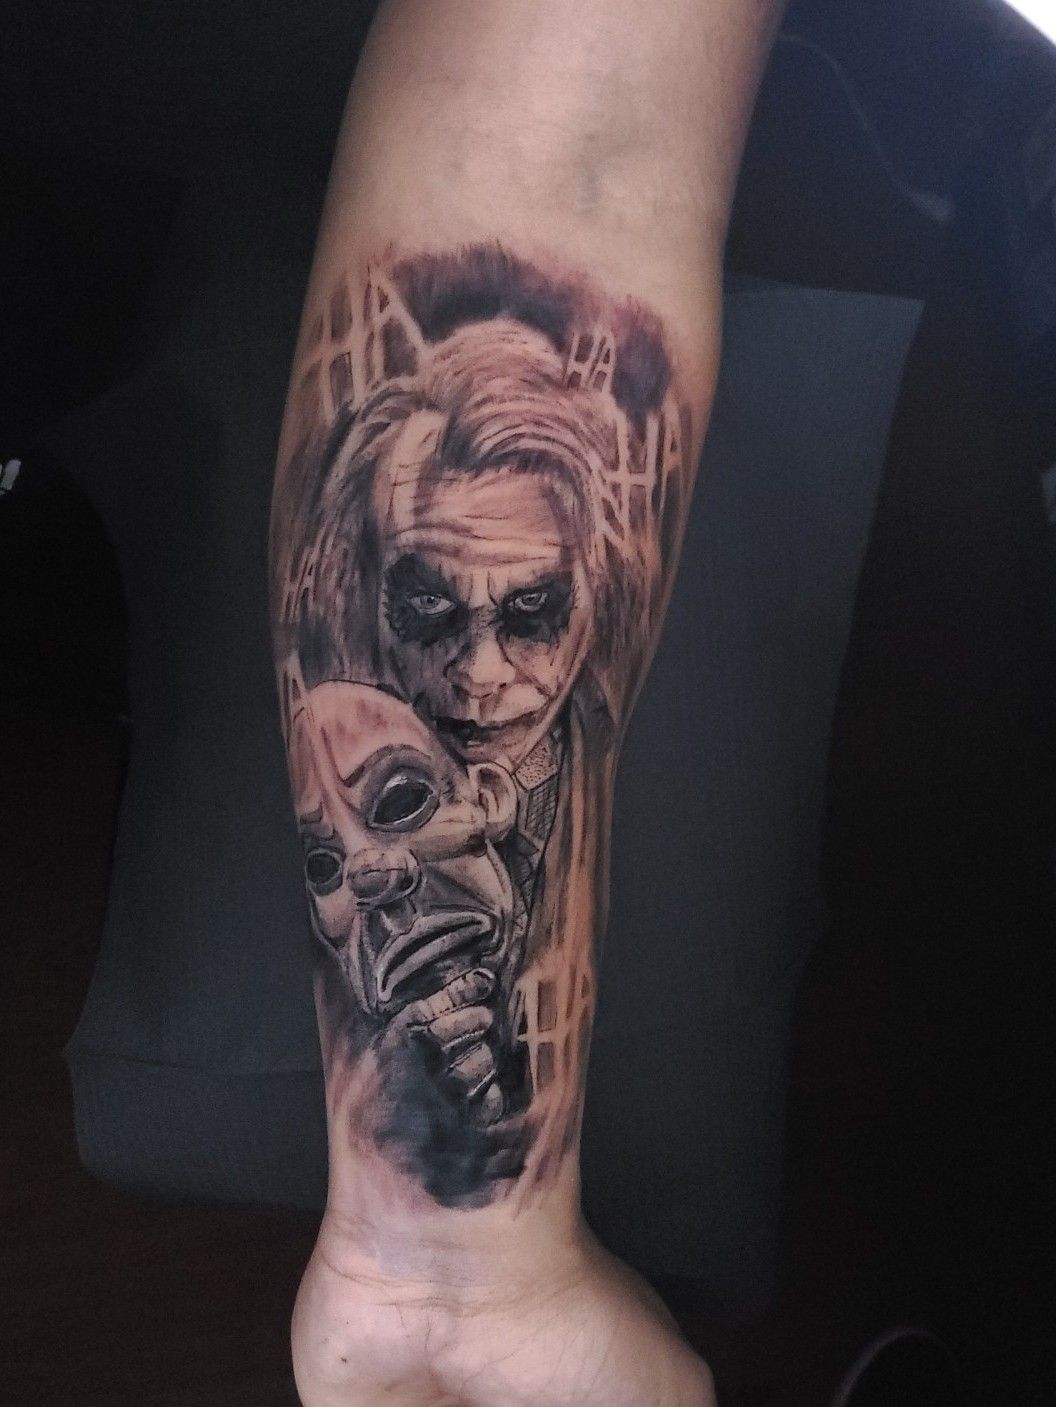 Why So Serious Tattoo  Best Tattoo Ideas Gallery